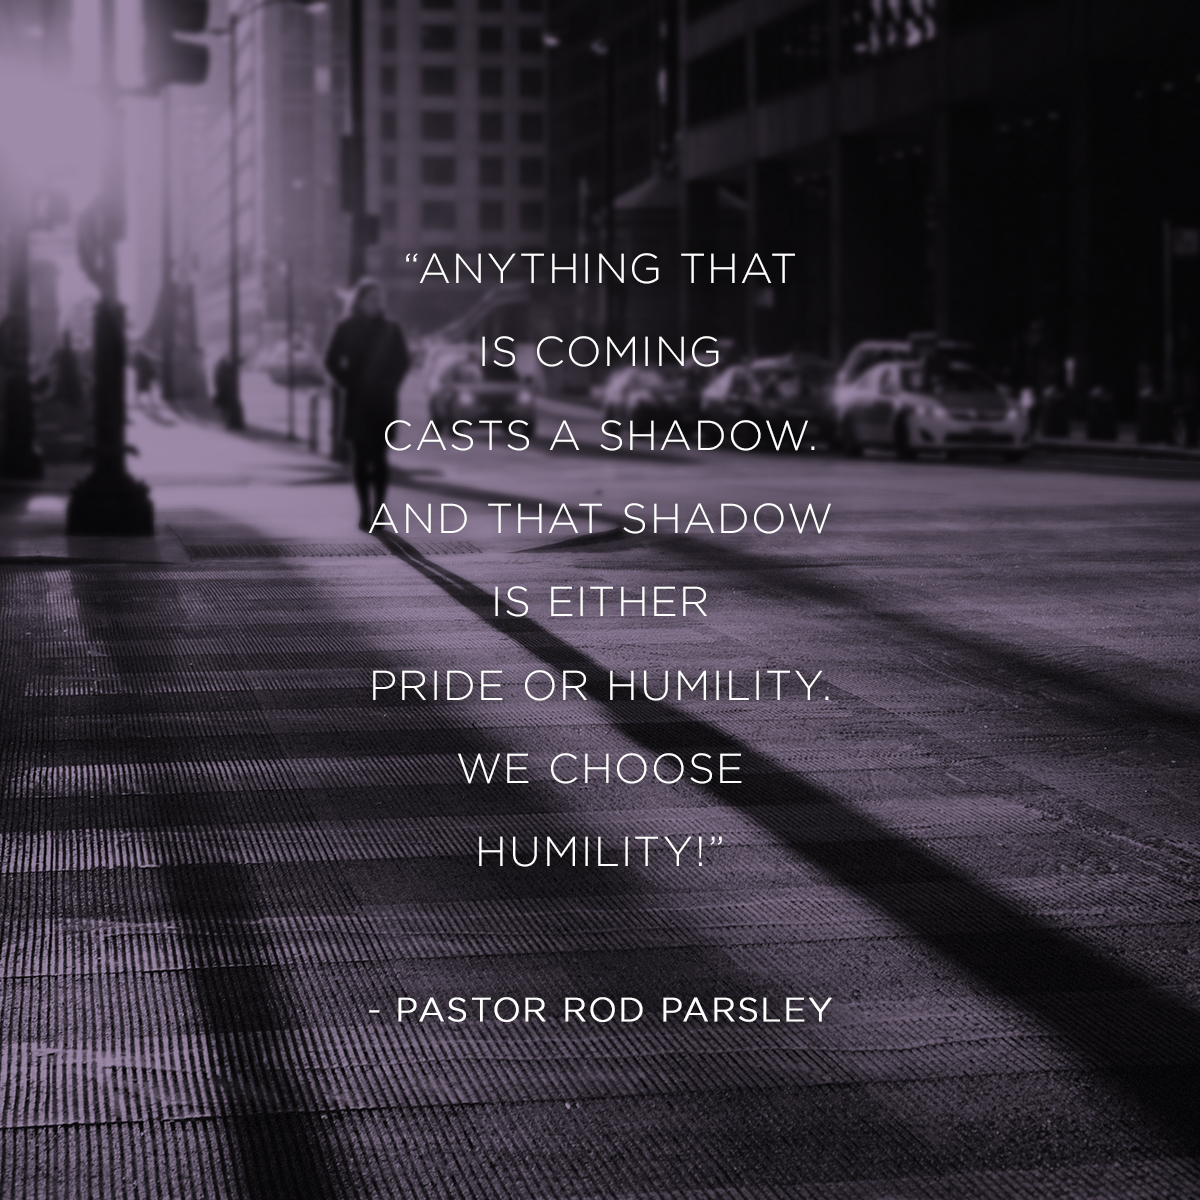 “Anything that is coming casts a shadow. And that shadow is either pride or humility. We choose humility!” – Pastor Rod Parsley